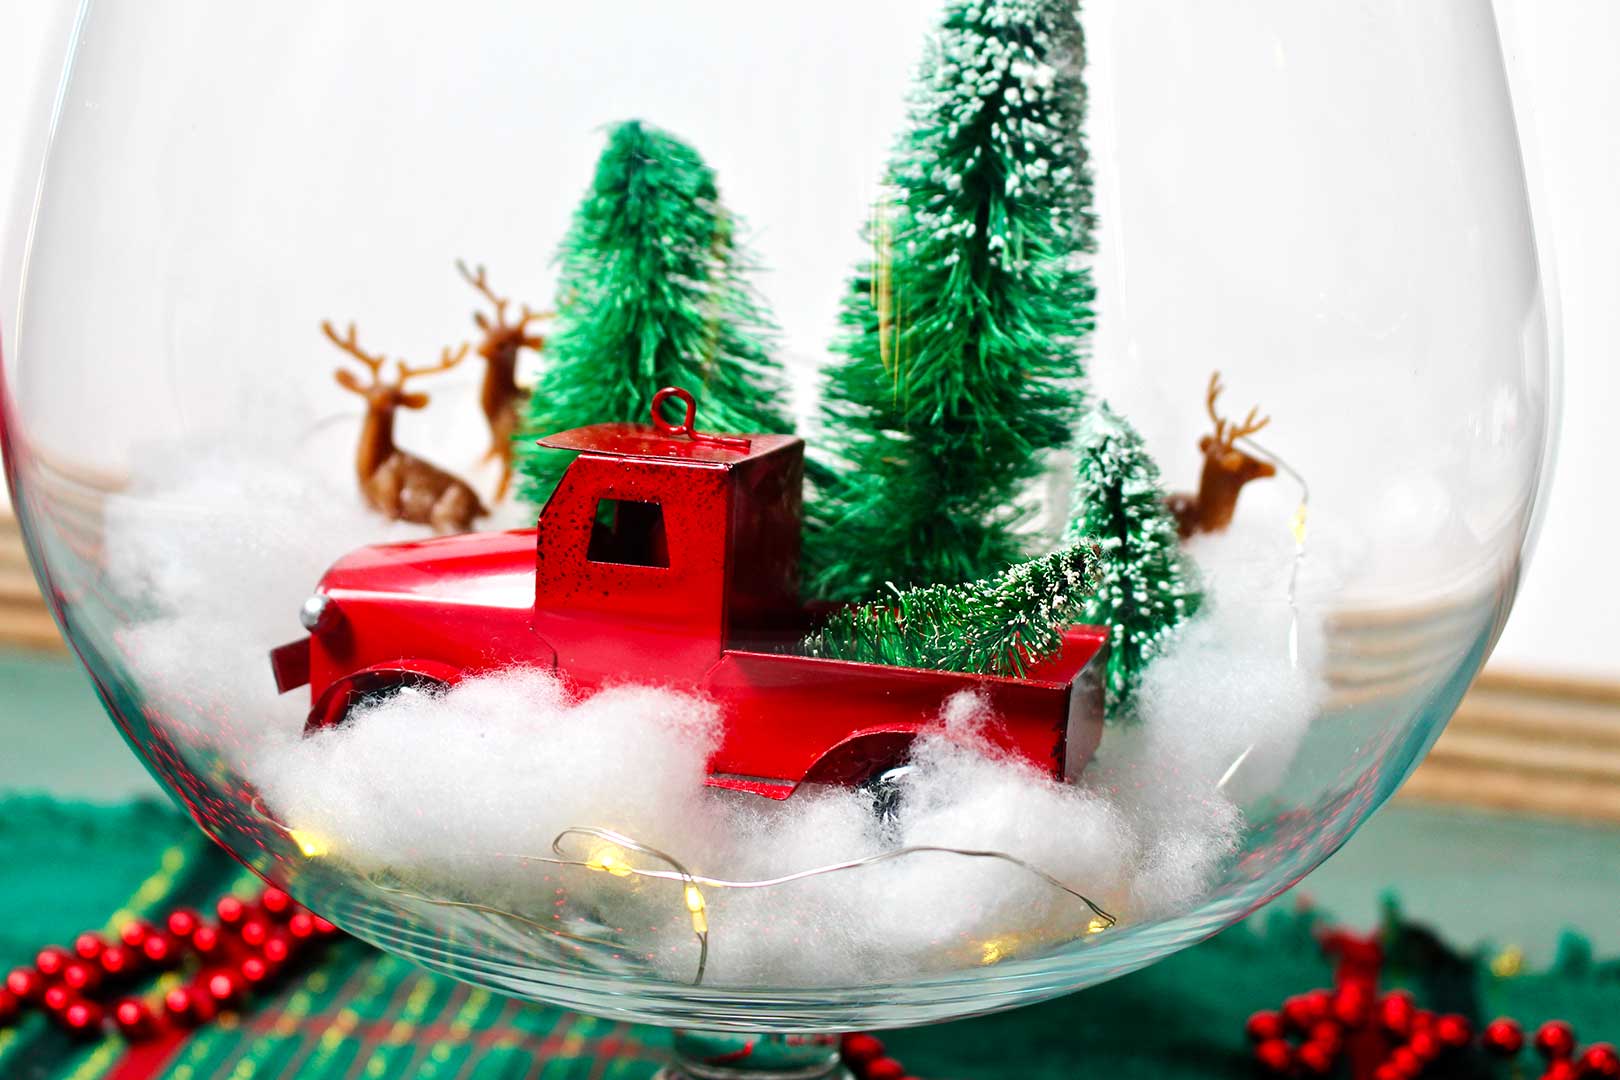 Closer view of the inside of the glass bowl centerpiece with old fashion red truck, faux trees, plastic deer, cotton "snow" and LED lights.